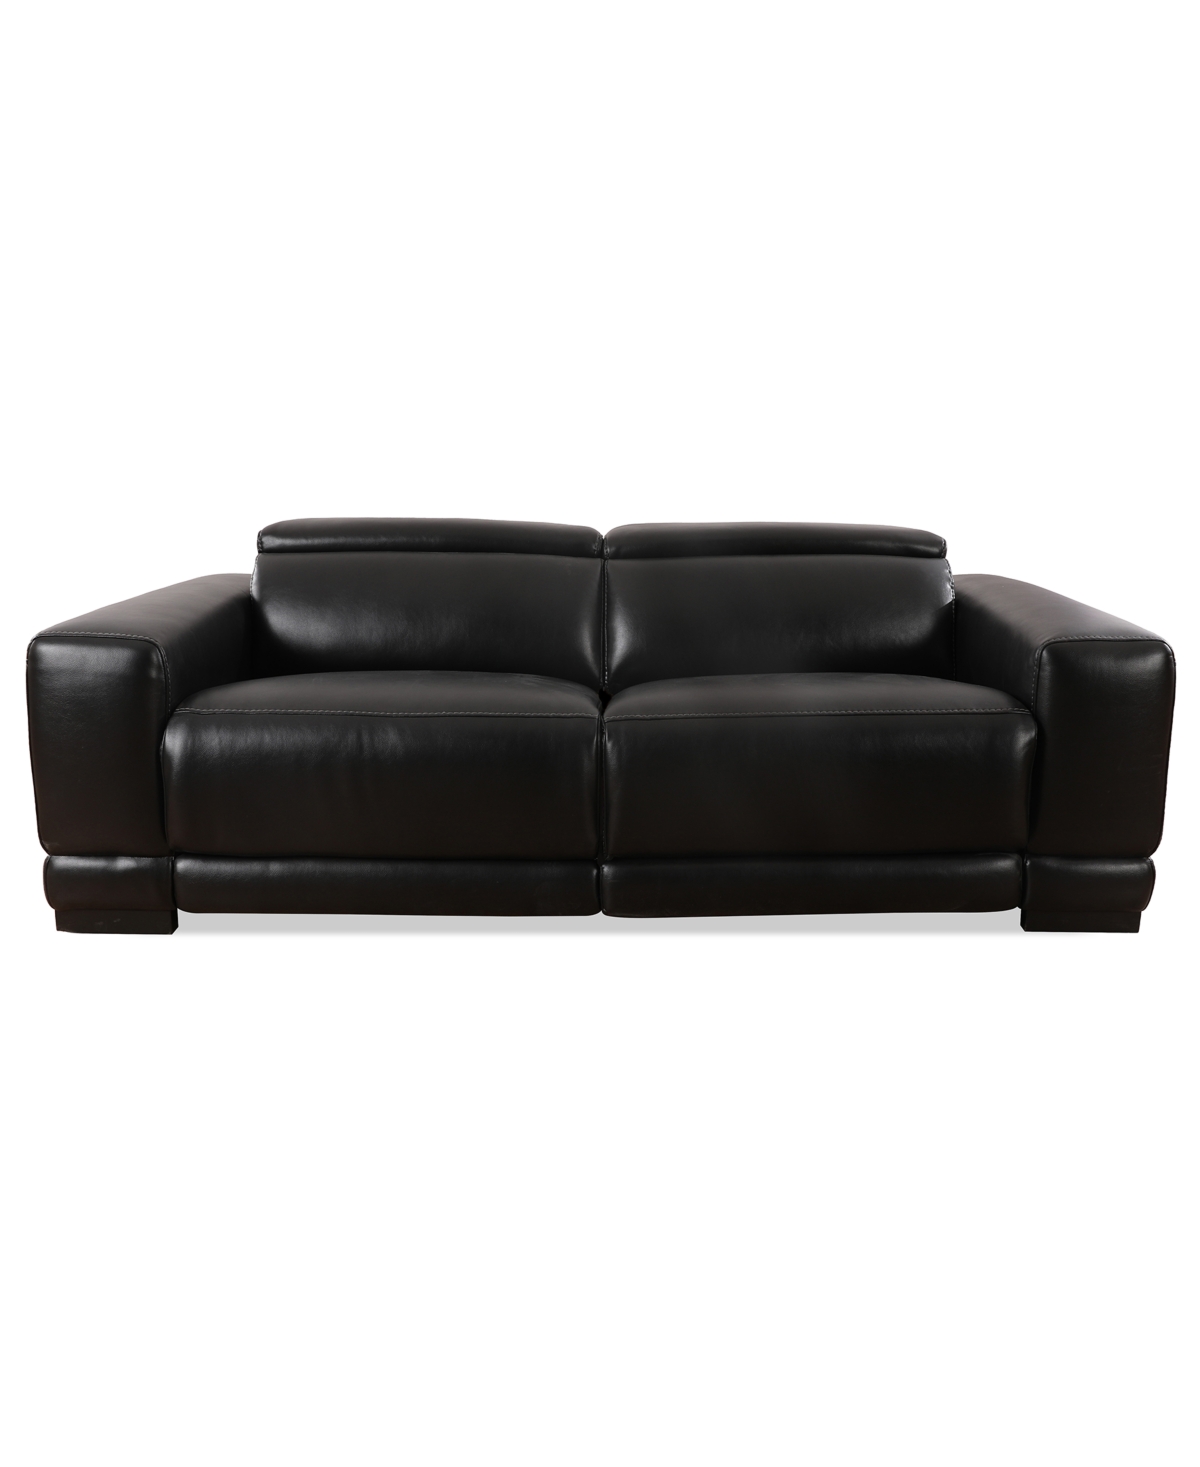 Furniture Krofton 2-pc. Beyond Leather Fabric Sofa With 2 Power Motion Recliners, Created For Macy's In Blackberry